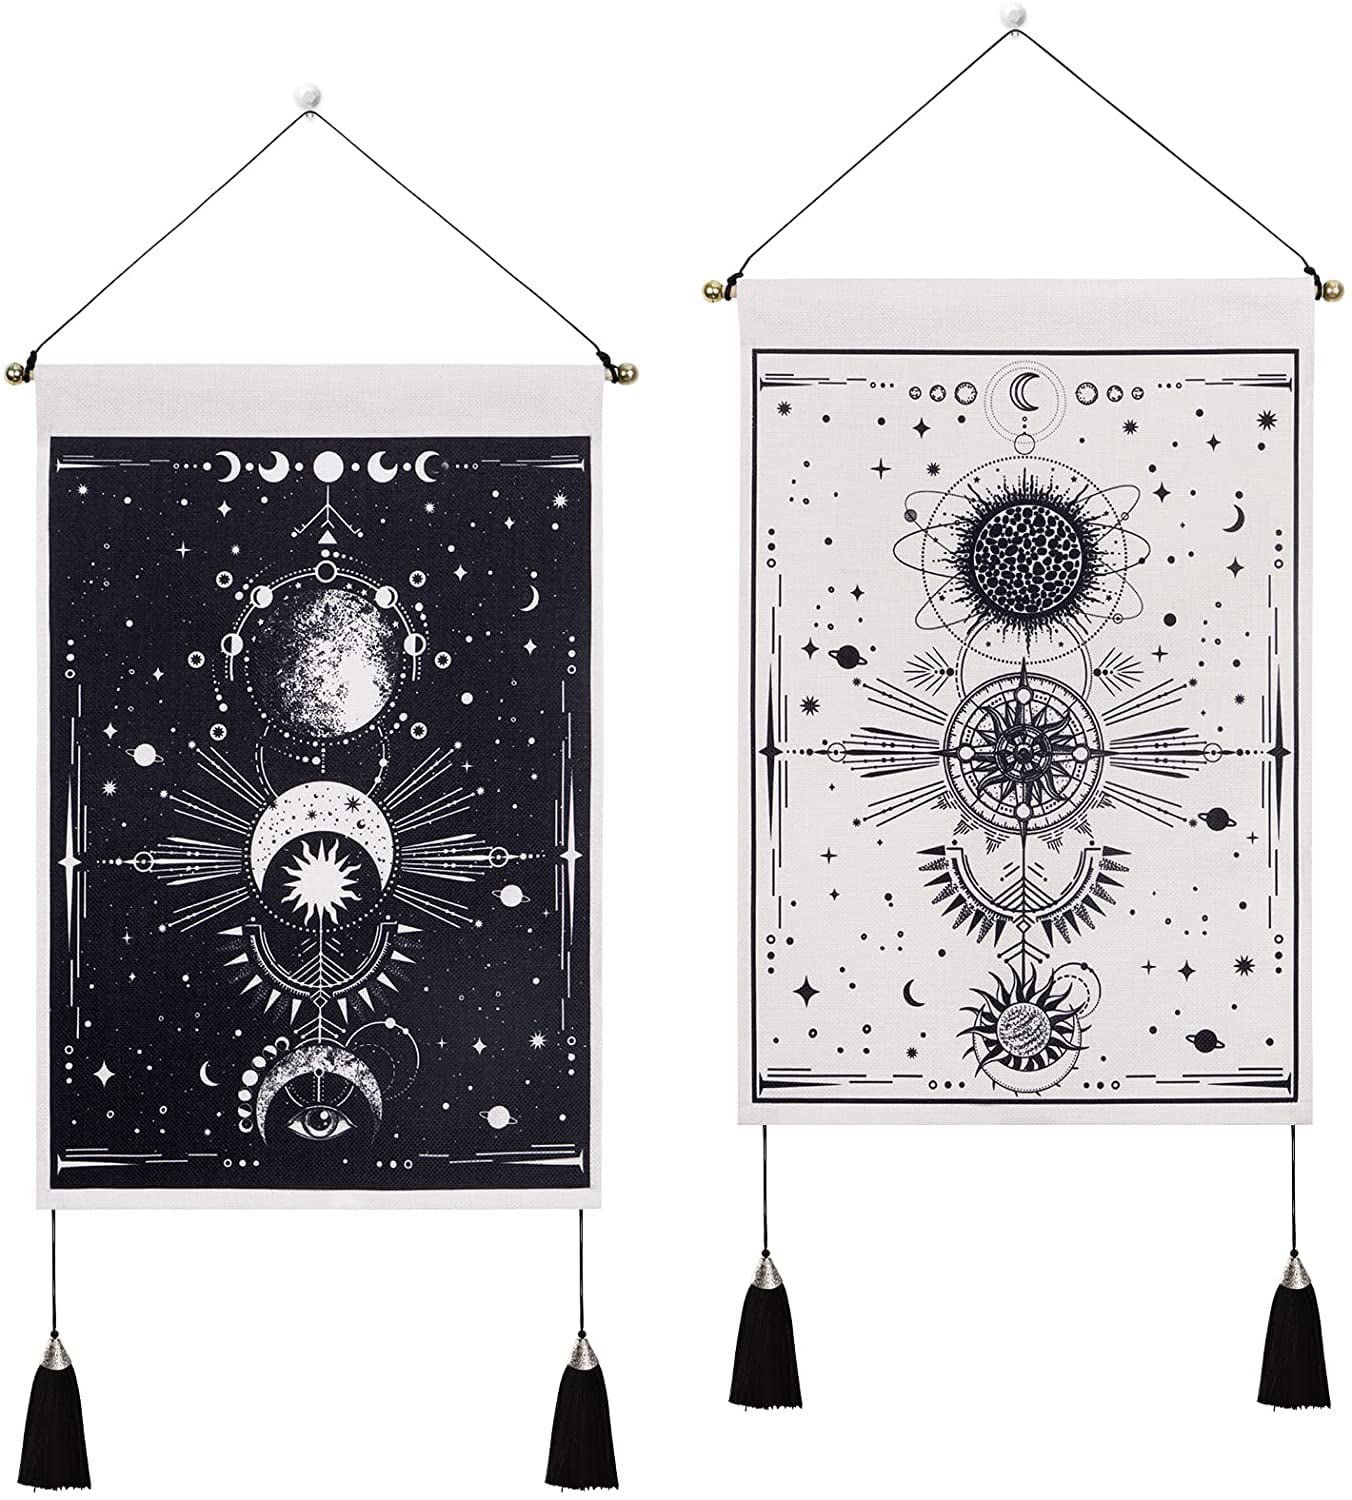 80 x 60in Neasyth Wall Hanging Tarot Tapestry Meditation Divination Ethnic Tapestries Art Rugs Polyester for Home Decor The Star